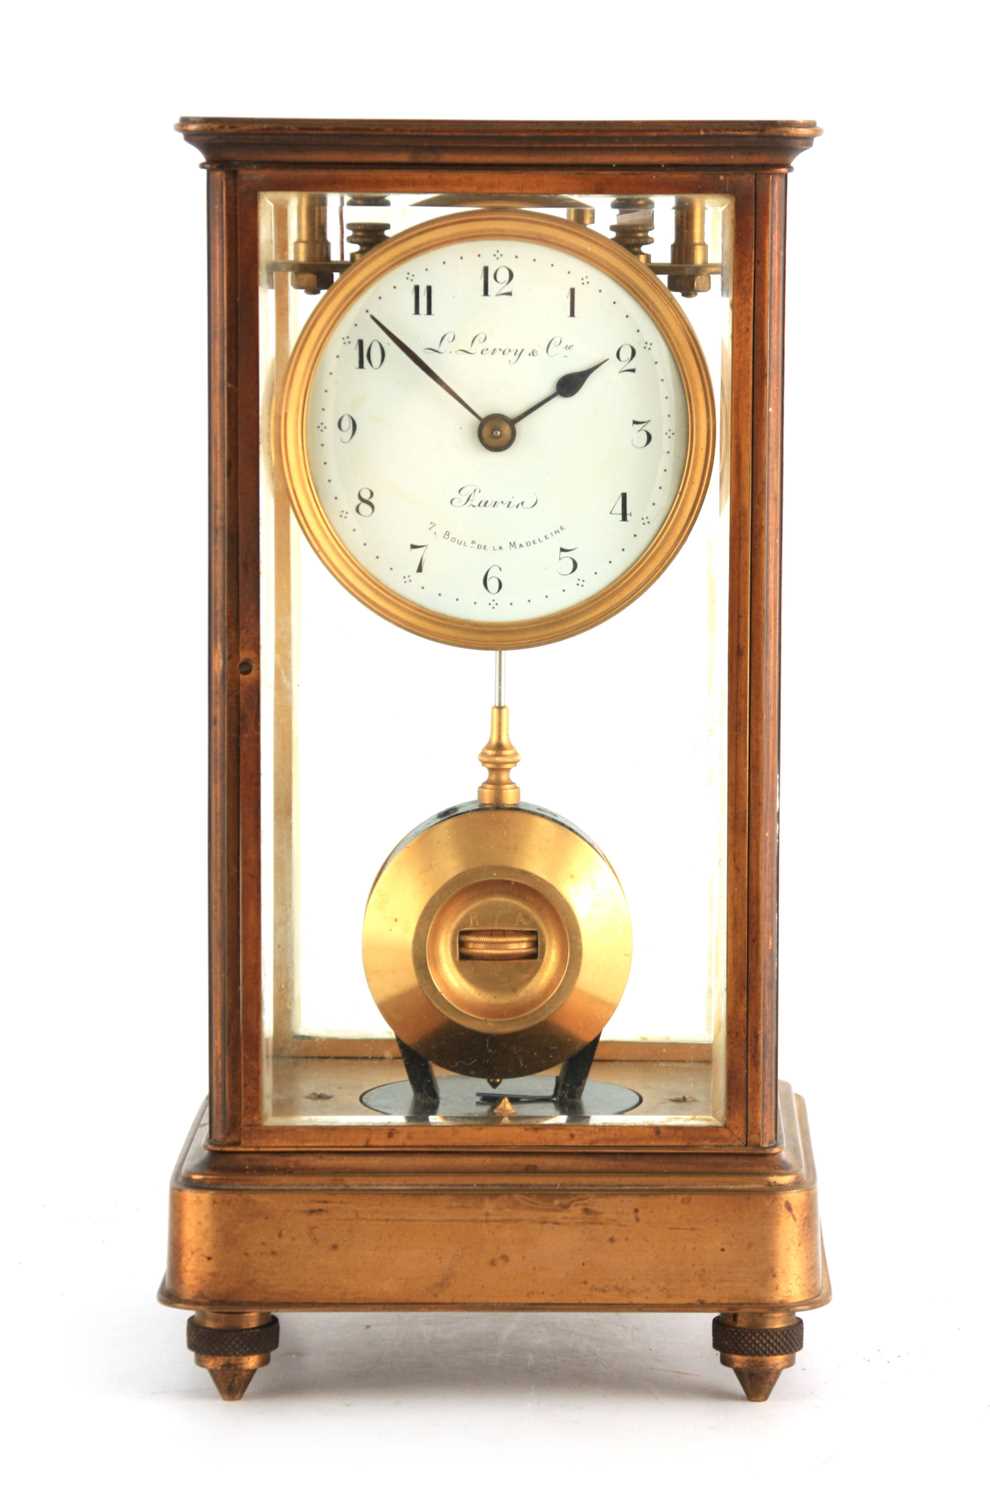 L. LEROY & CO. PARIS A RARE AND GOOD QUALITY EARLY 20TH CENTURY ELECTRIC FOUR-GLASS MANTEL CLOCK